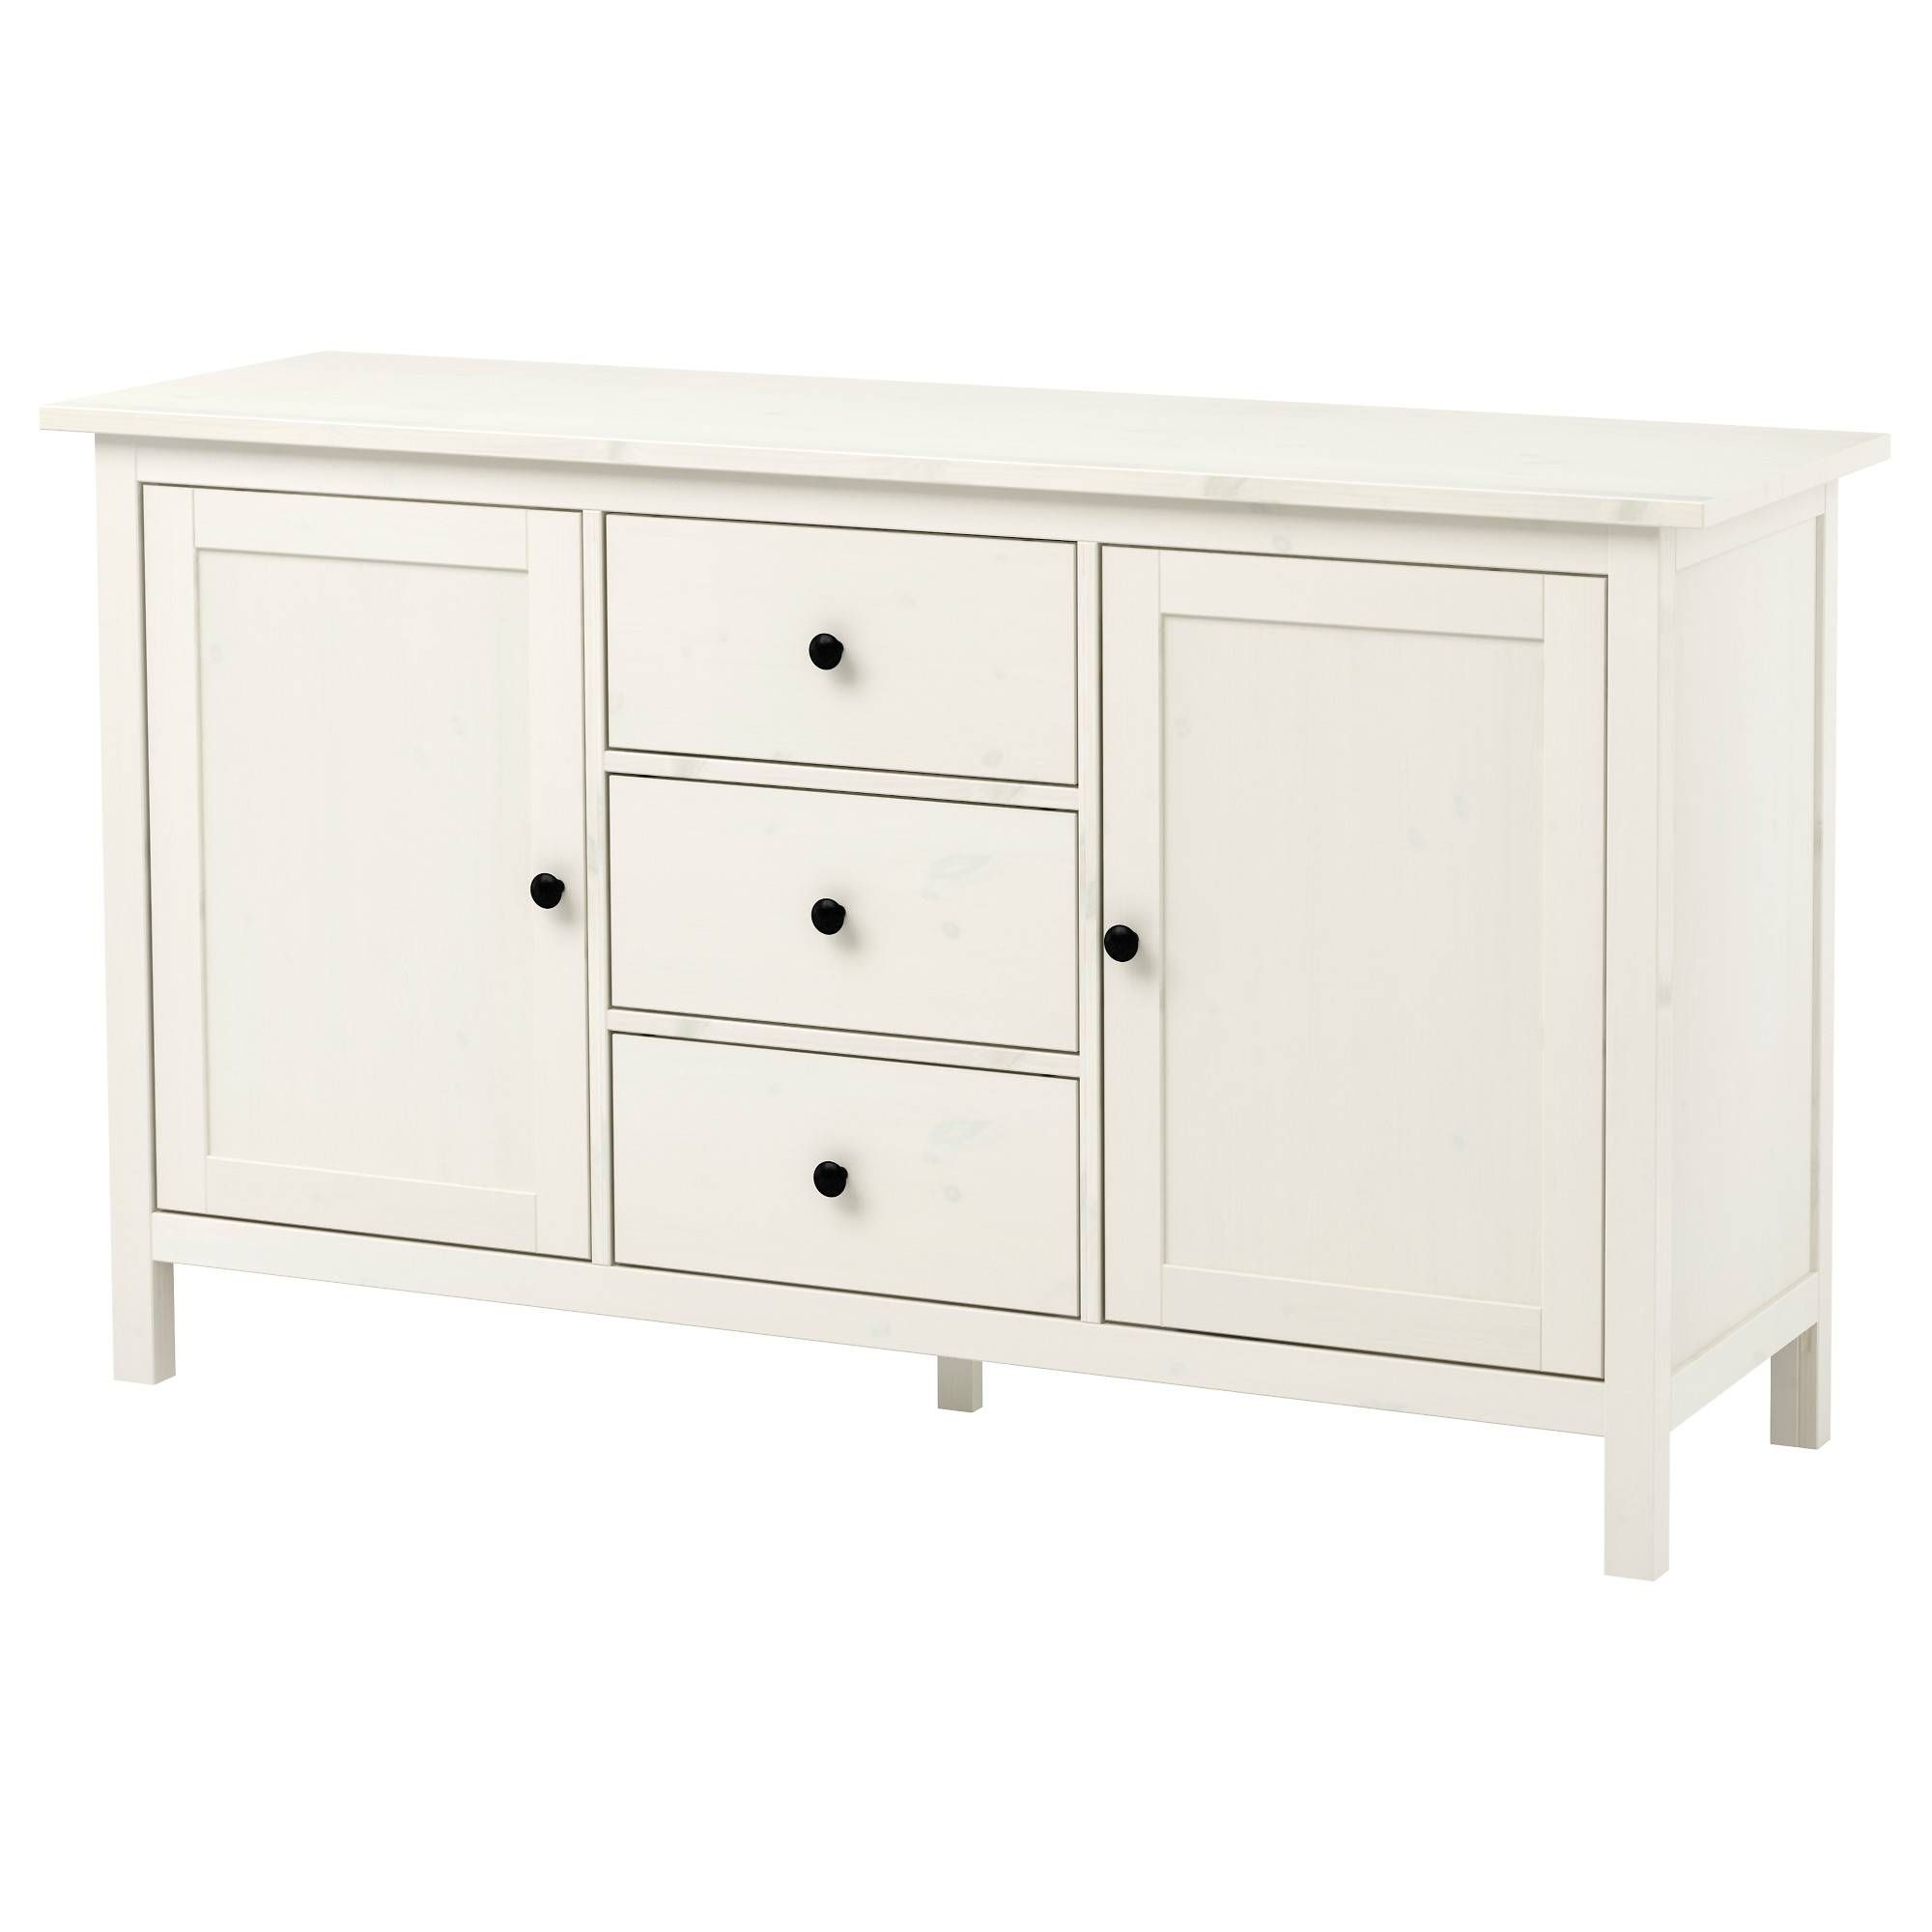 Buffet Tables & Sideboards – Ikea In Narrow Sideboards (View 21 of 30)